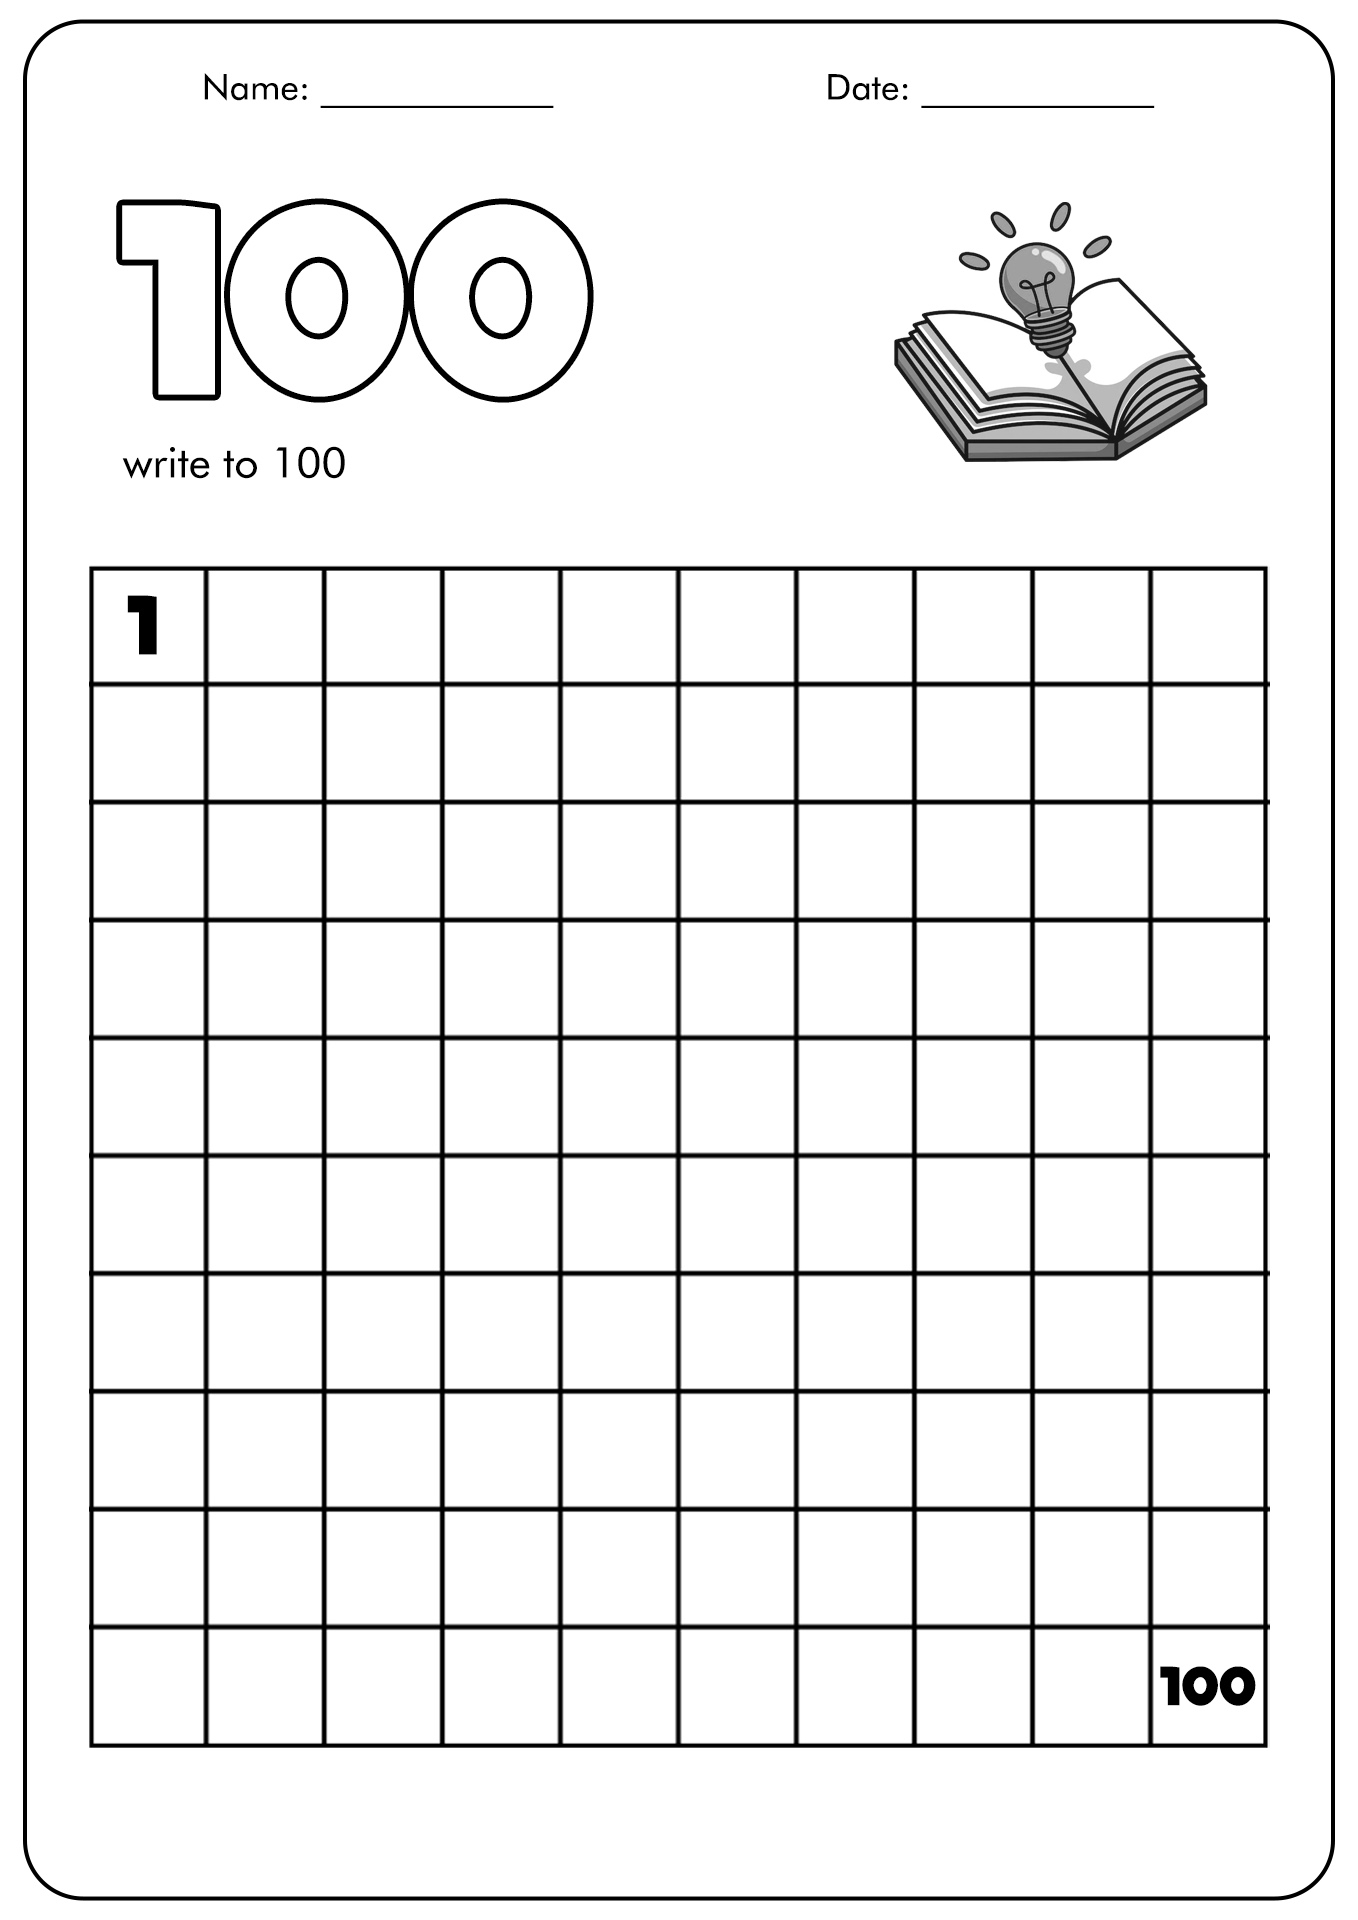 amazing-printable-worksheet-for-kids-about-to-write-each-missing-number-1-100-worksheet-bee